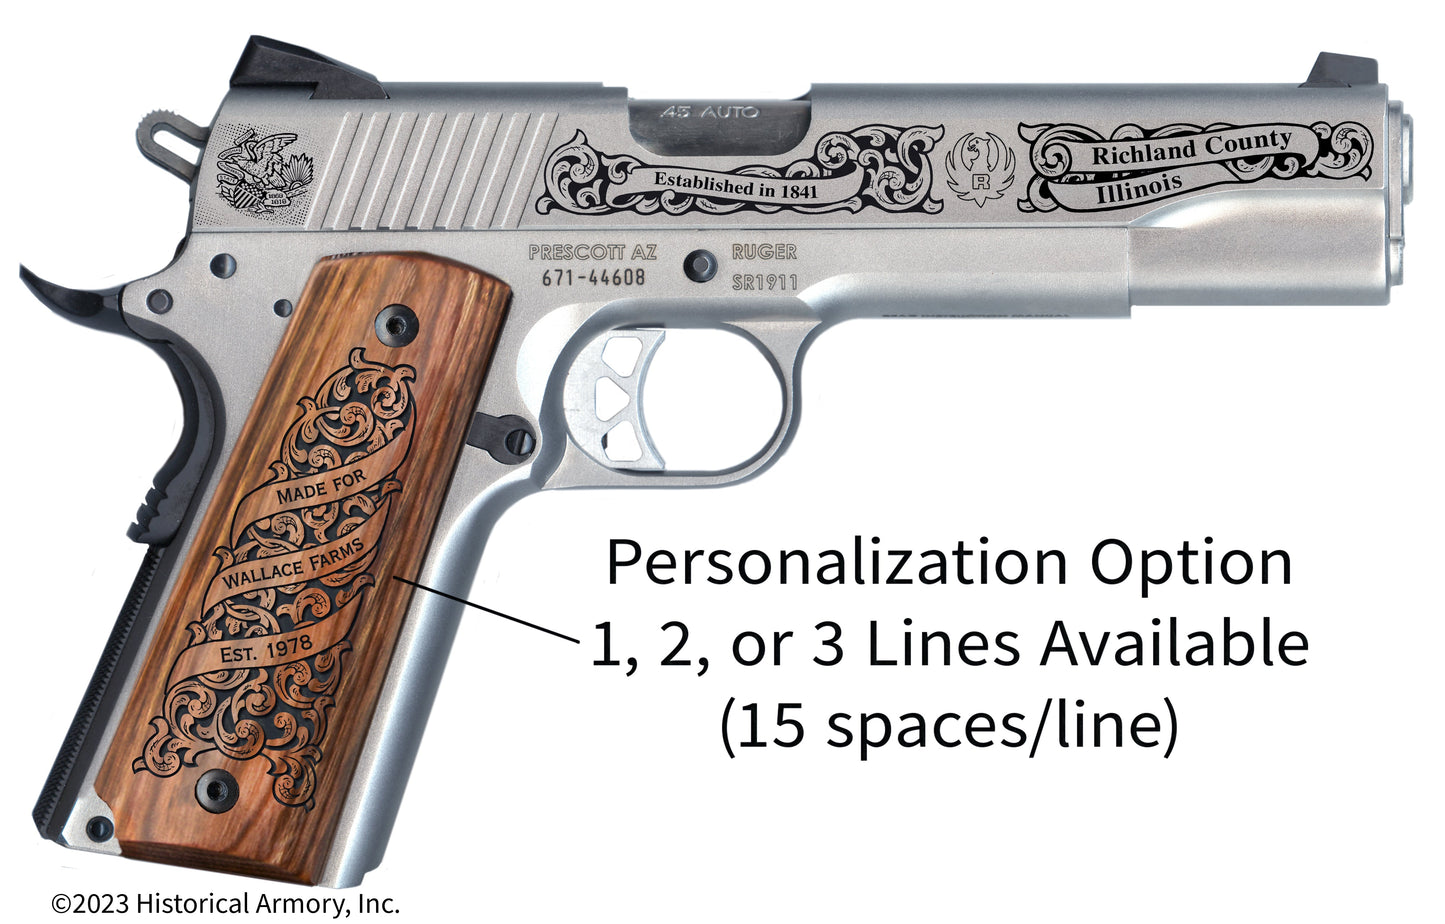 Richland County Illinois Personalized Engraved .45 Auto Ruger 1911